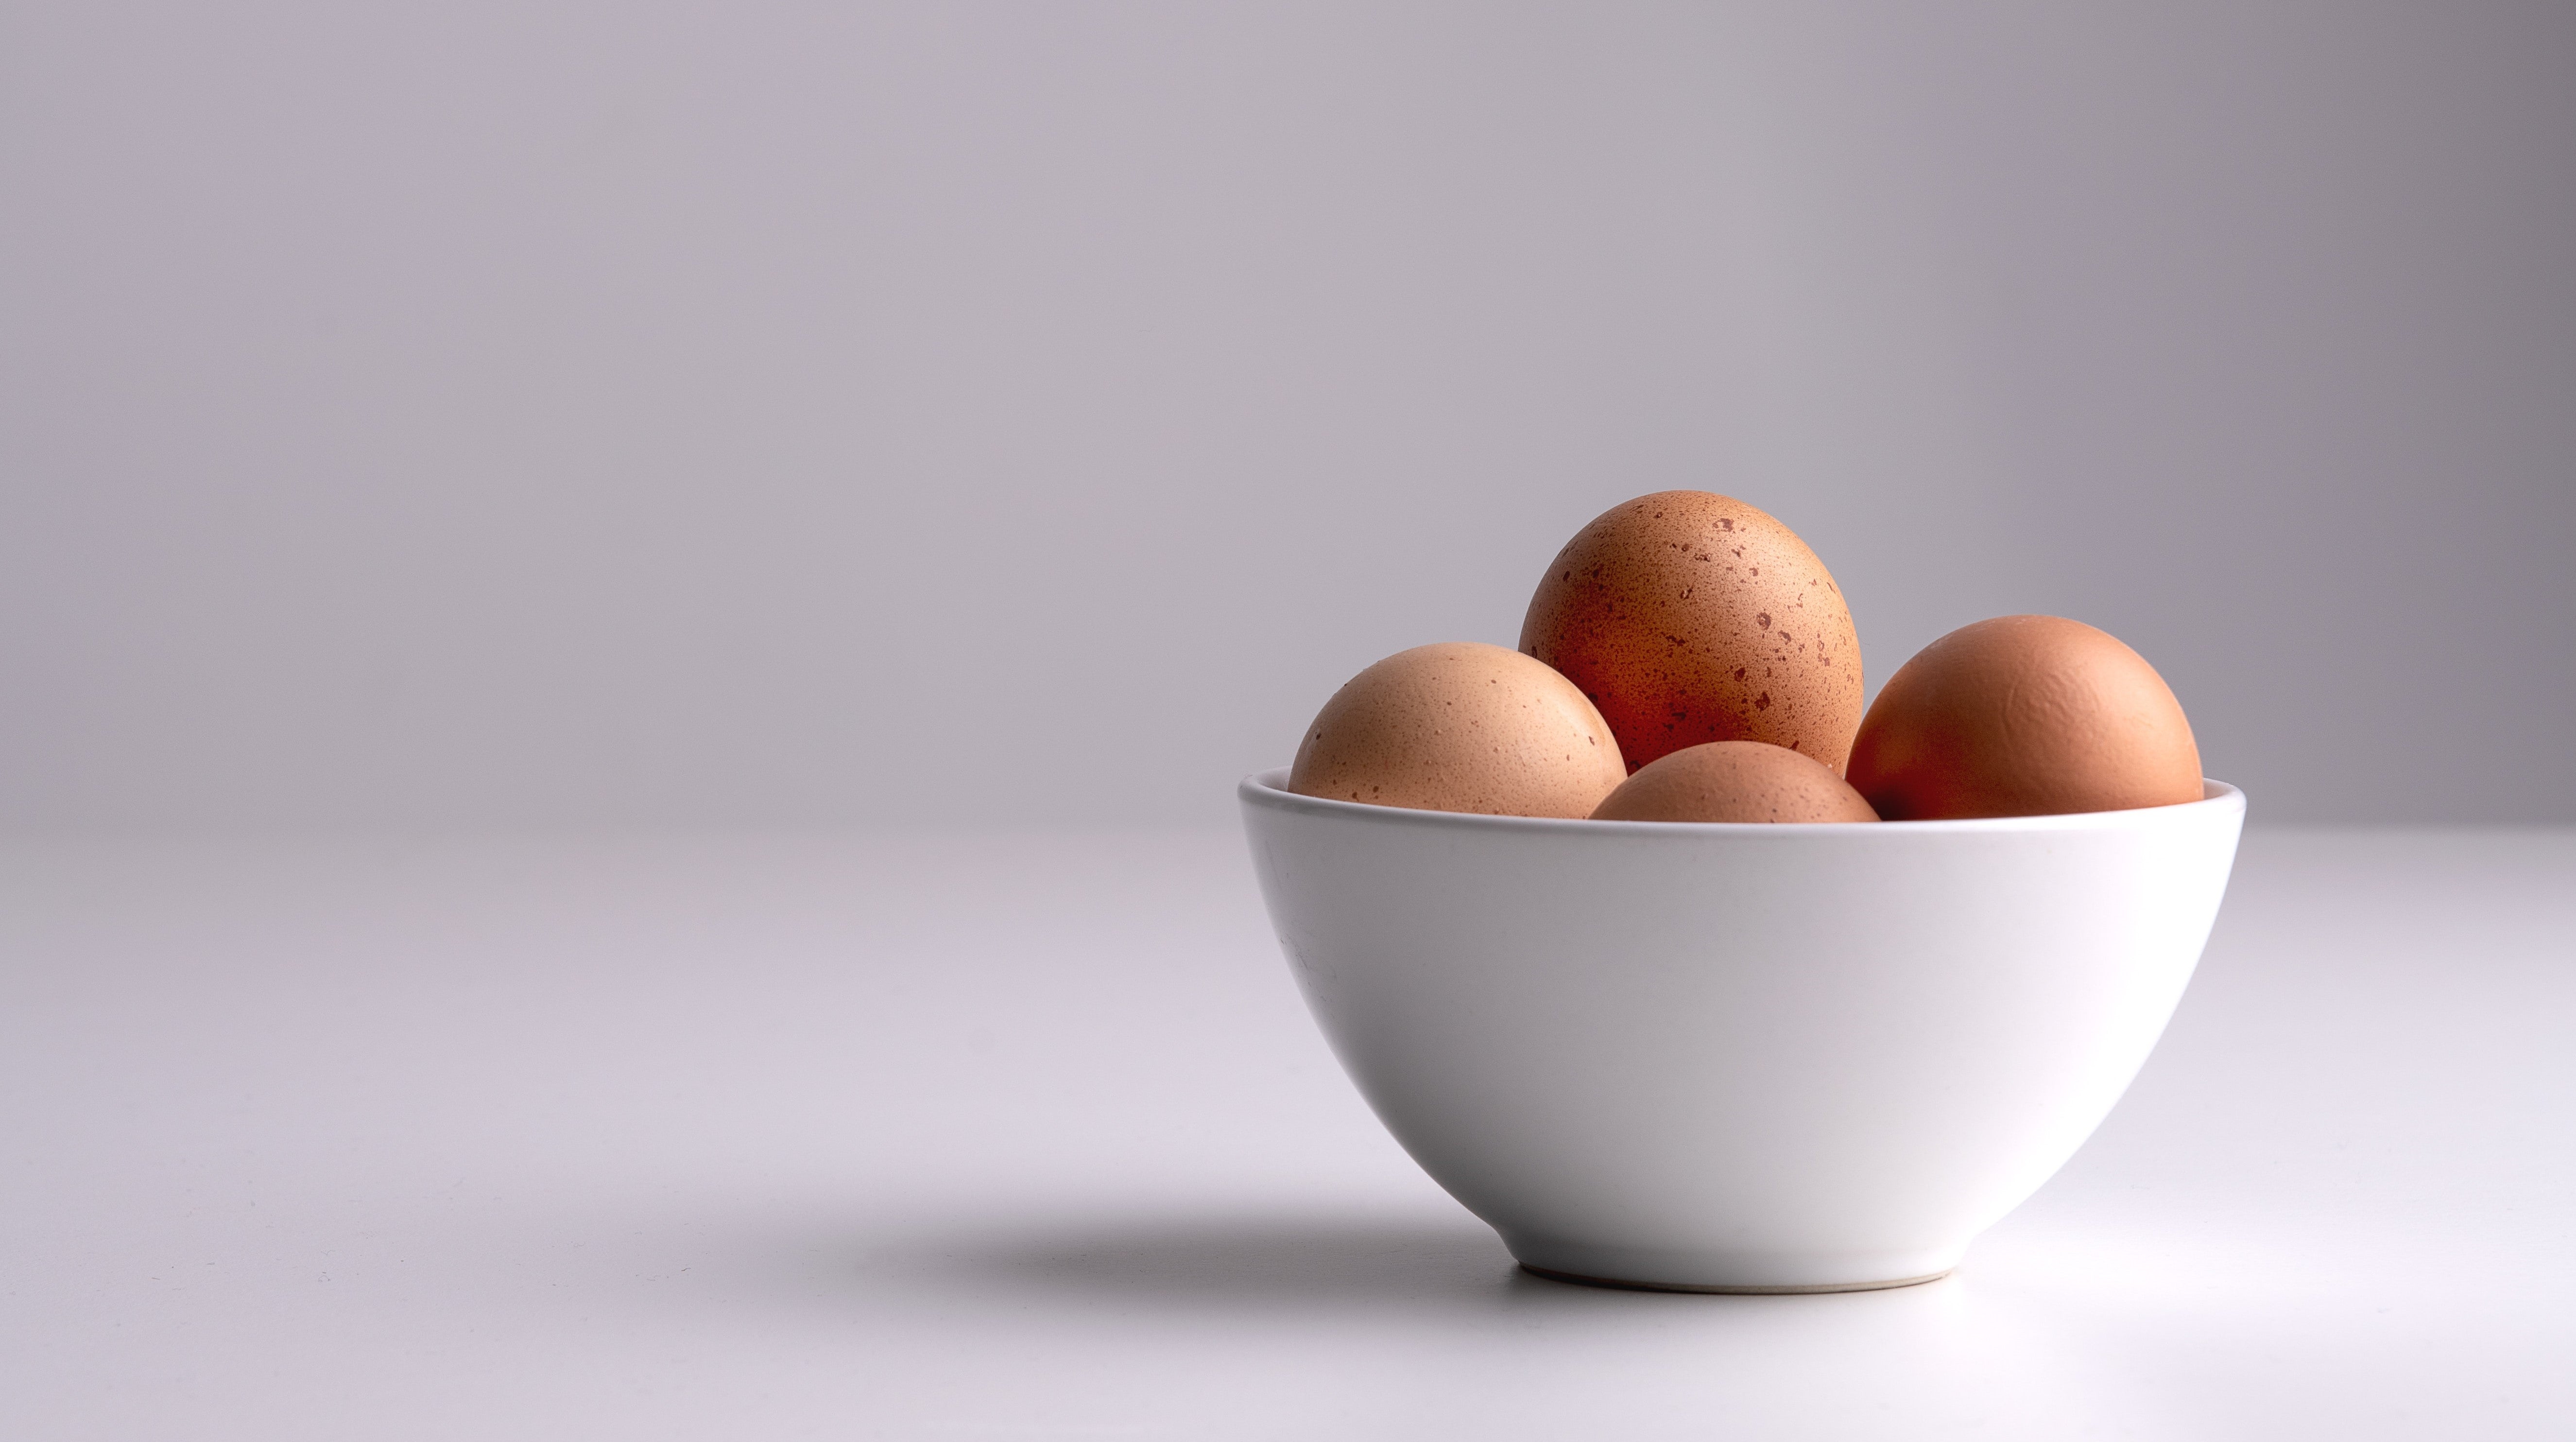 Eggsploration: All About Eggs